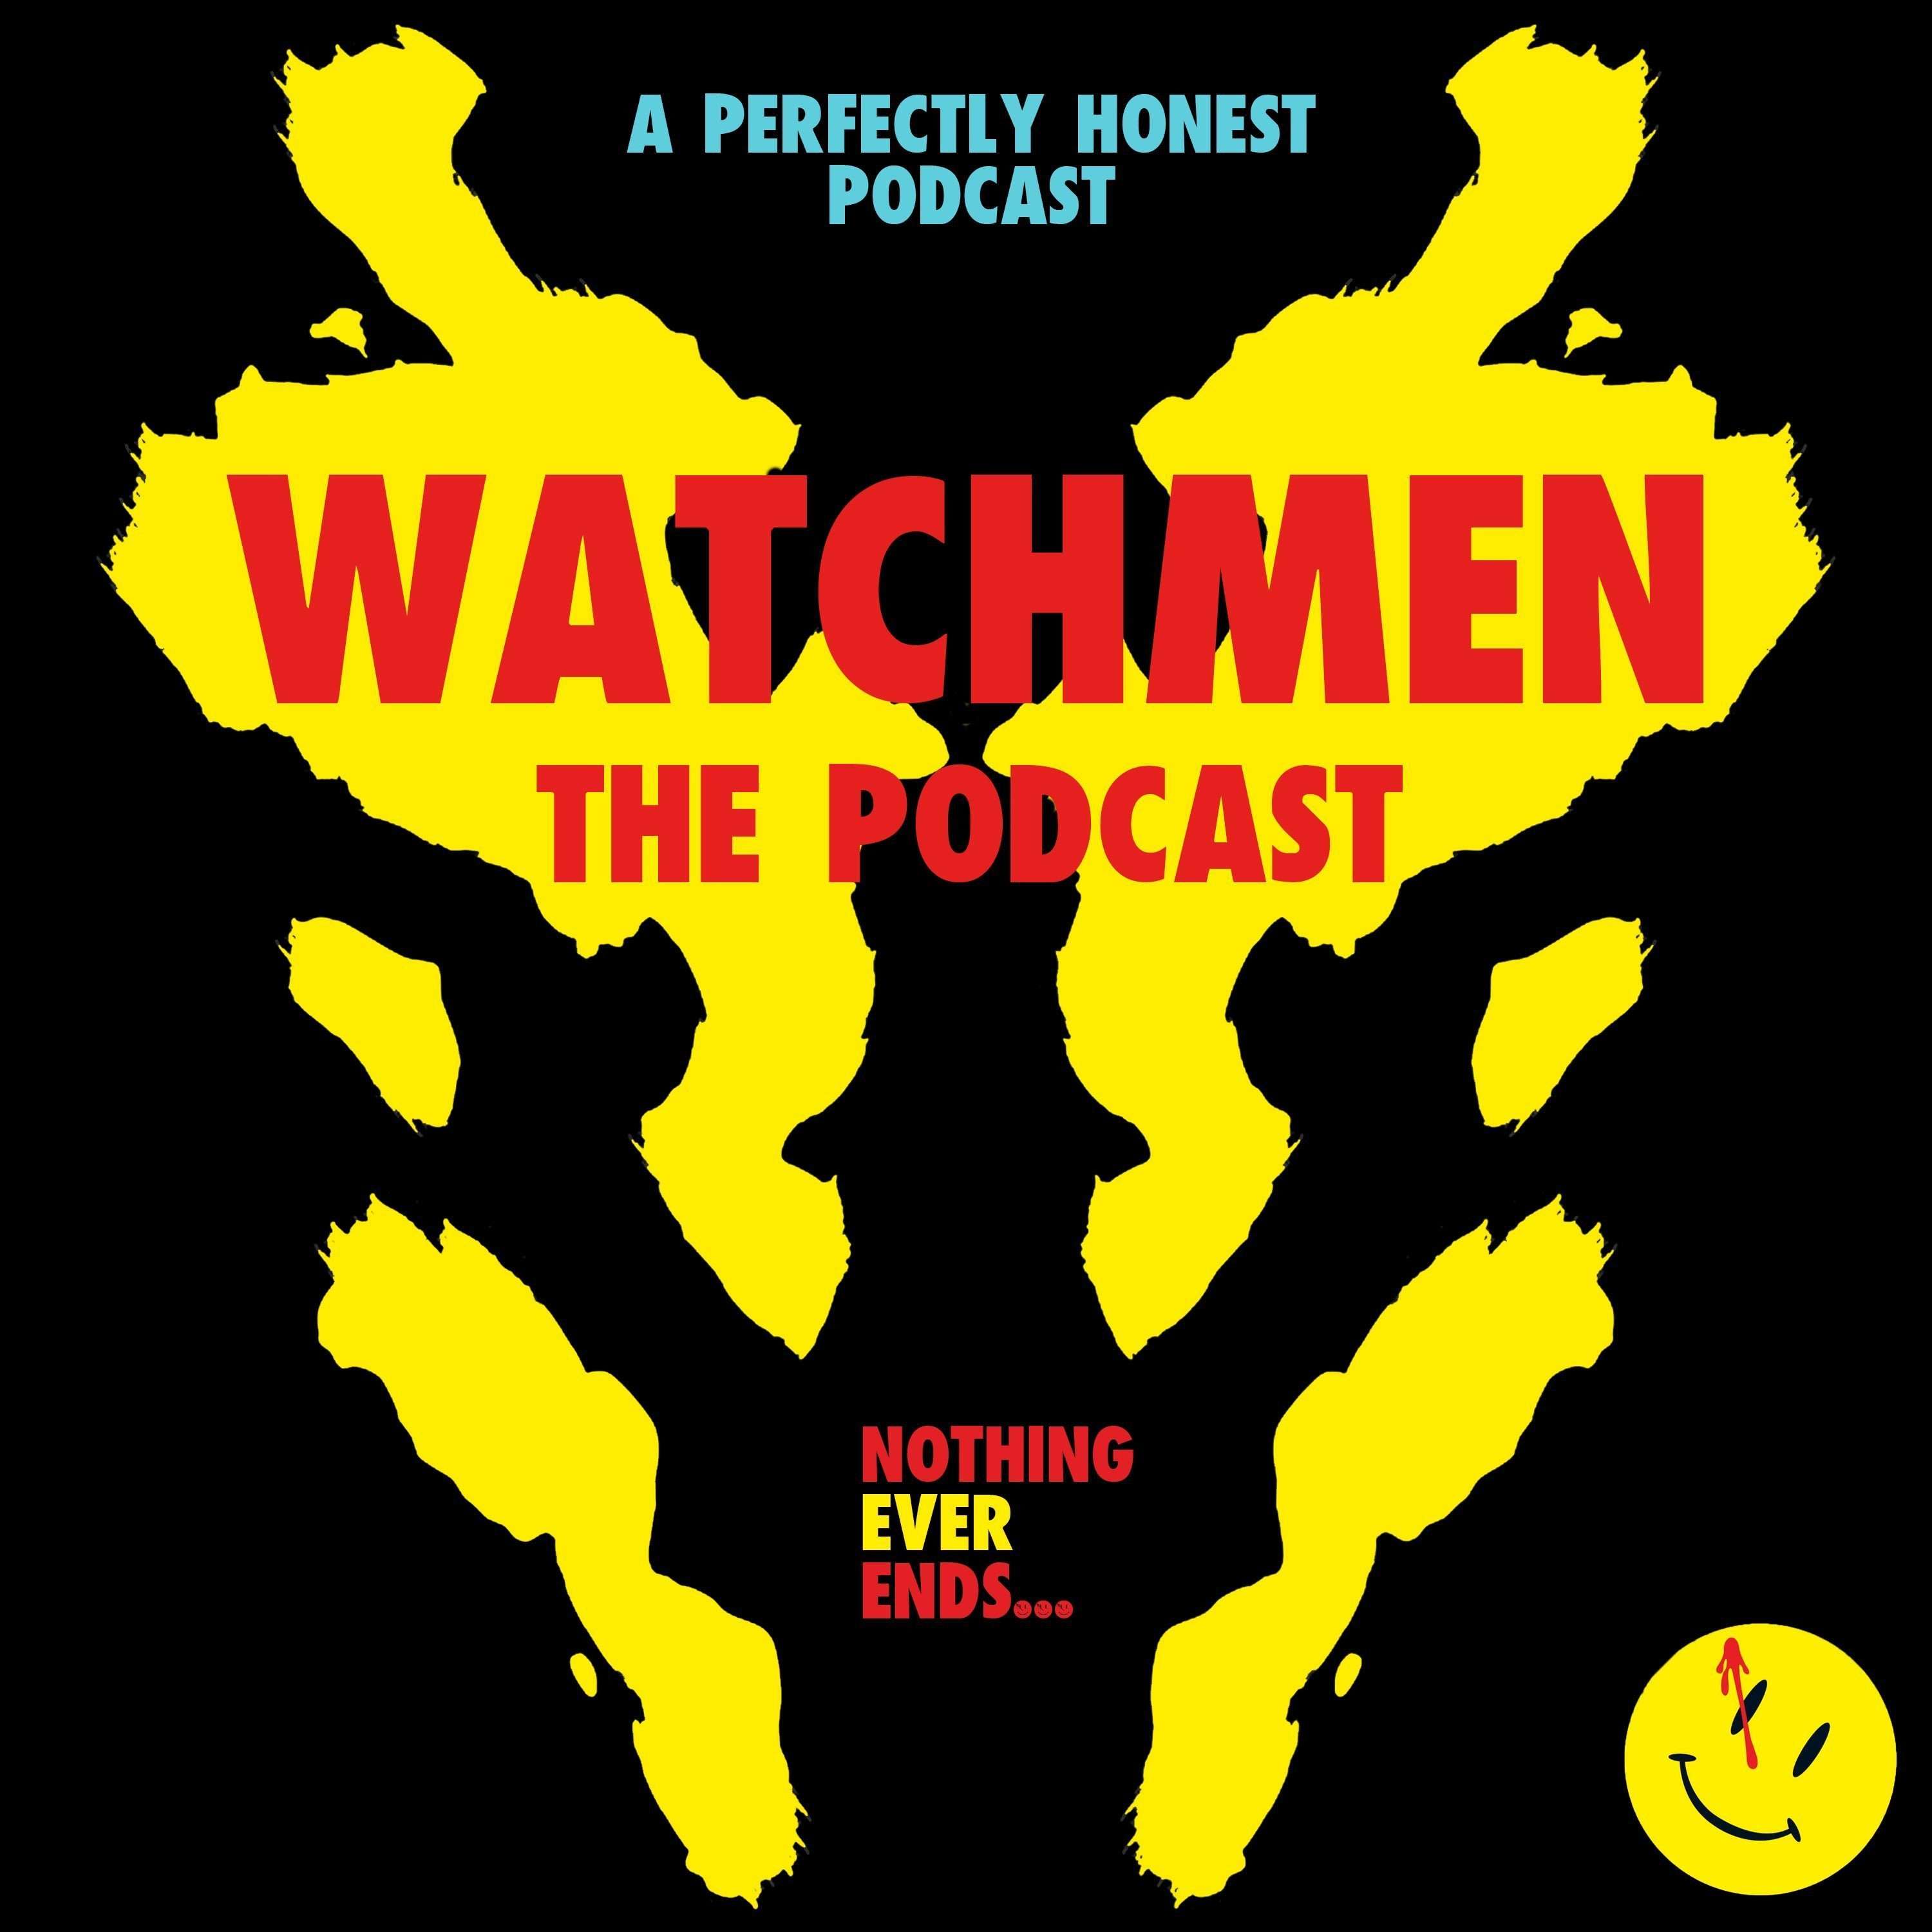 Watchmen The Podcast